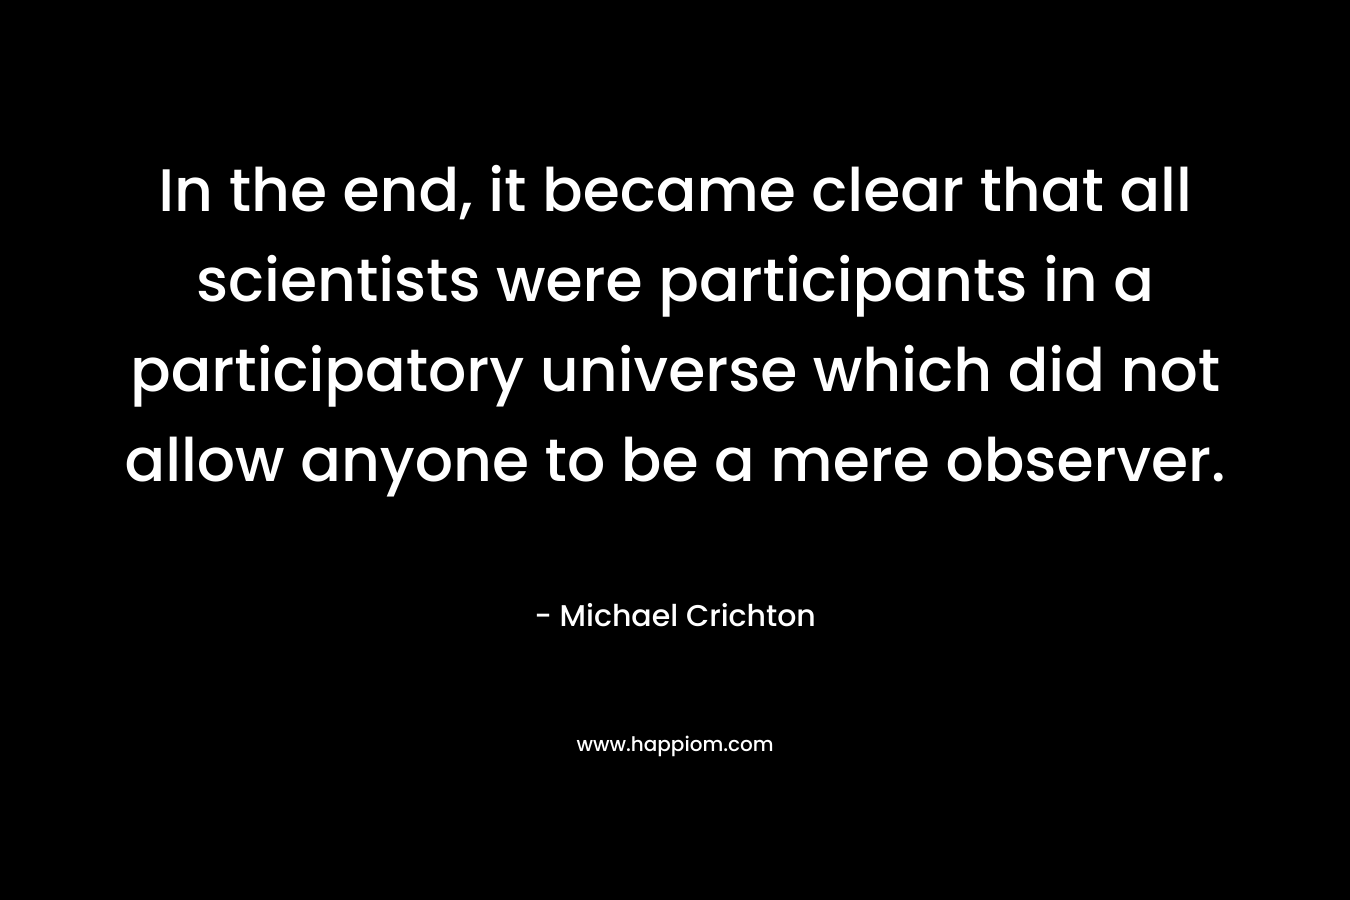 In the end, it became clear that all scientists were participants in a participatory universe which did not allow anyone to be a mere observer. – Michael Crichton